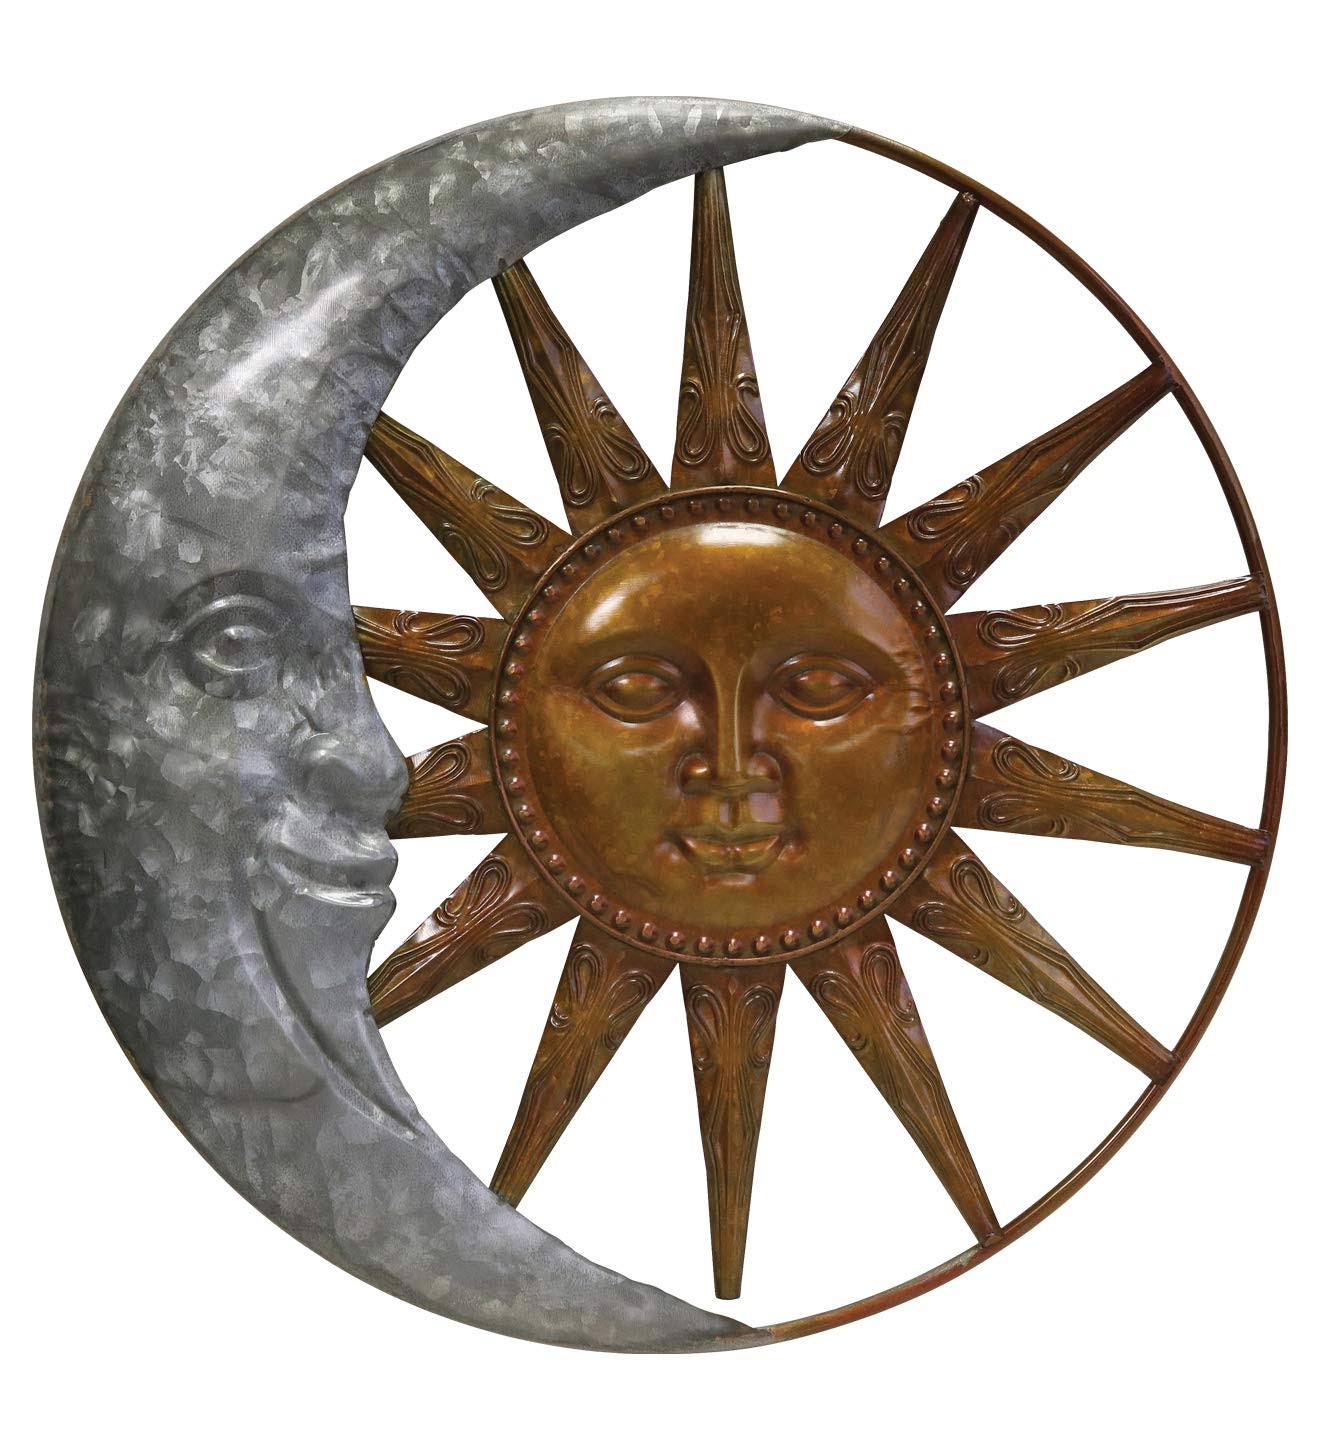 Regal Art and Gift Galvanized Sun and Moon Wall Decor Figurines